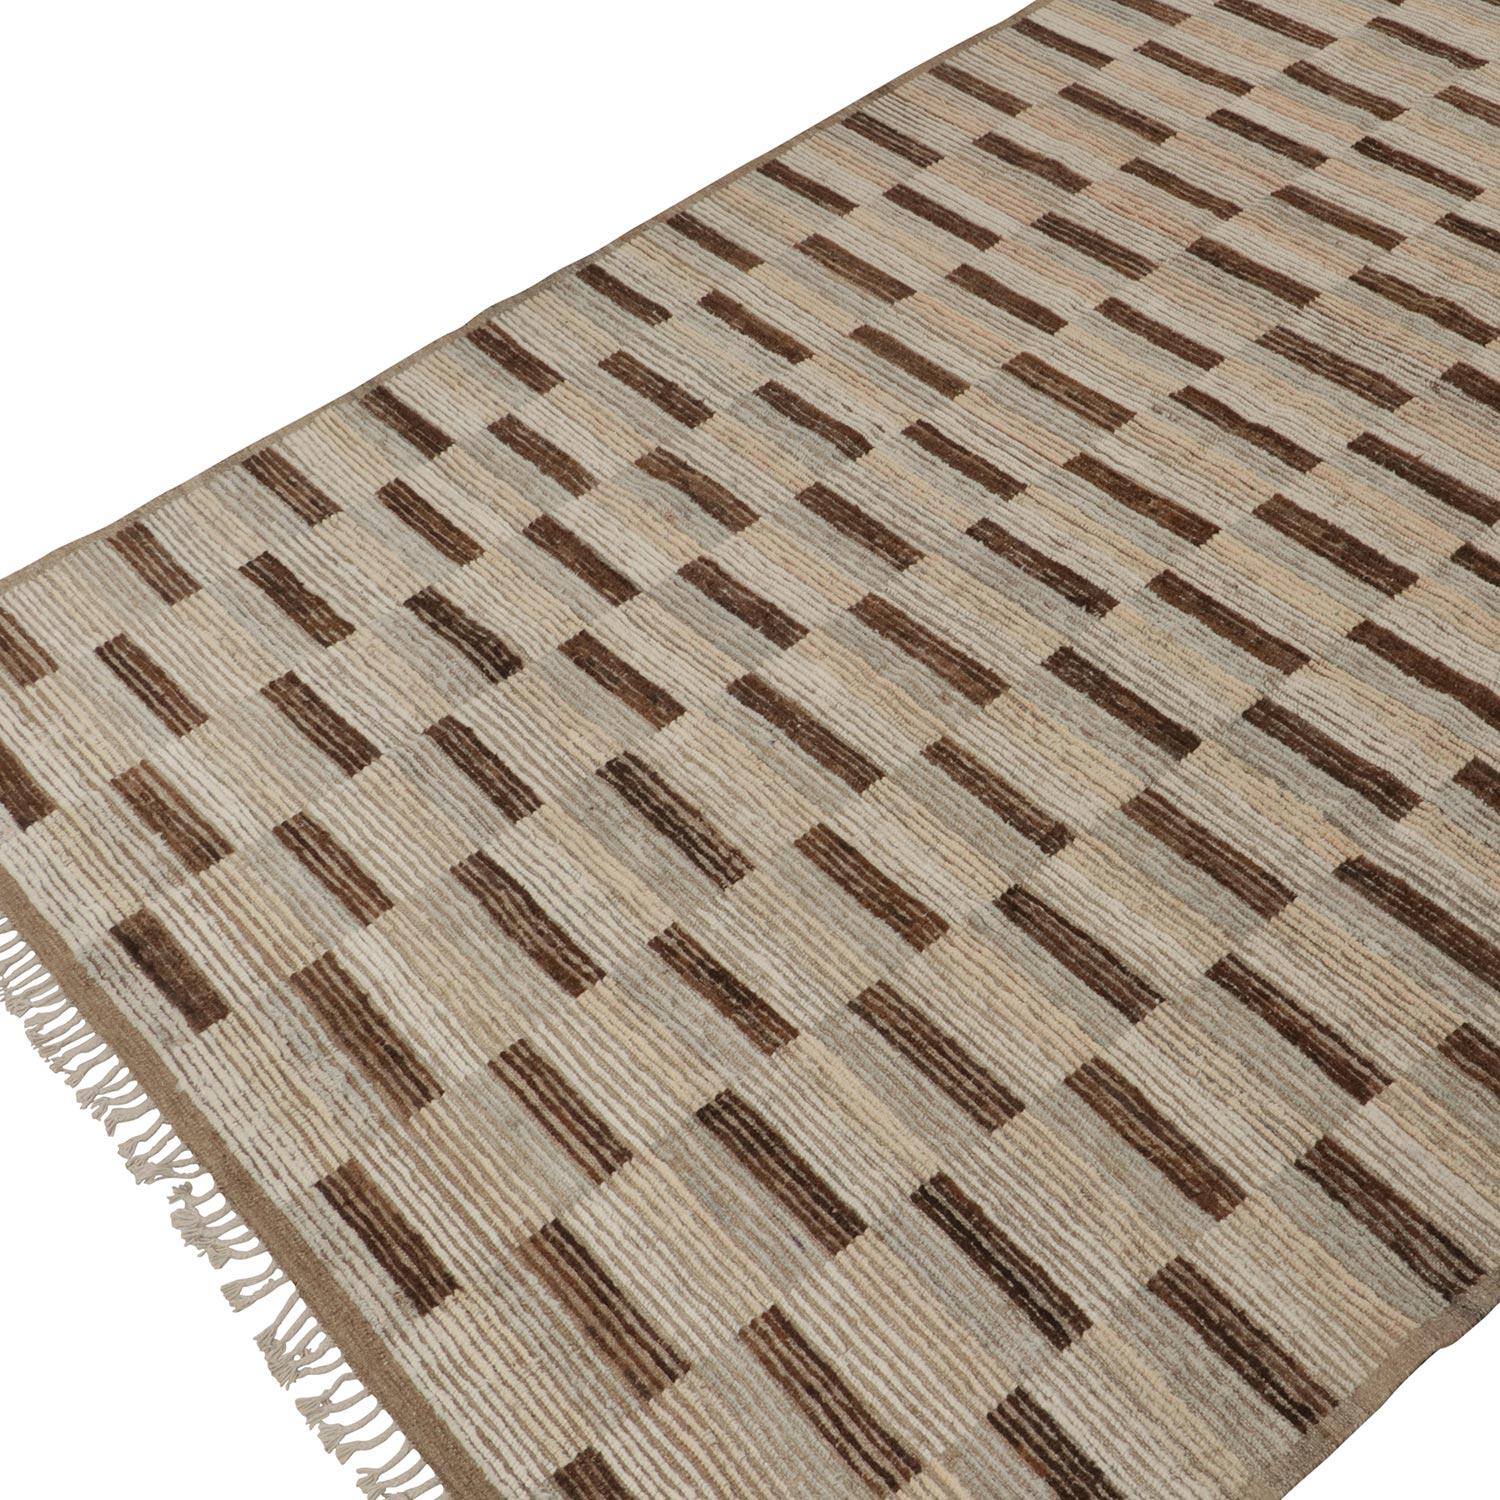 A modern take on traditional Moroccan design, this Brown Moroccan Wool Rug - 8'2